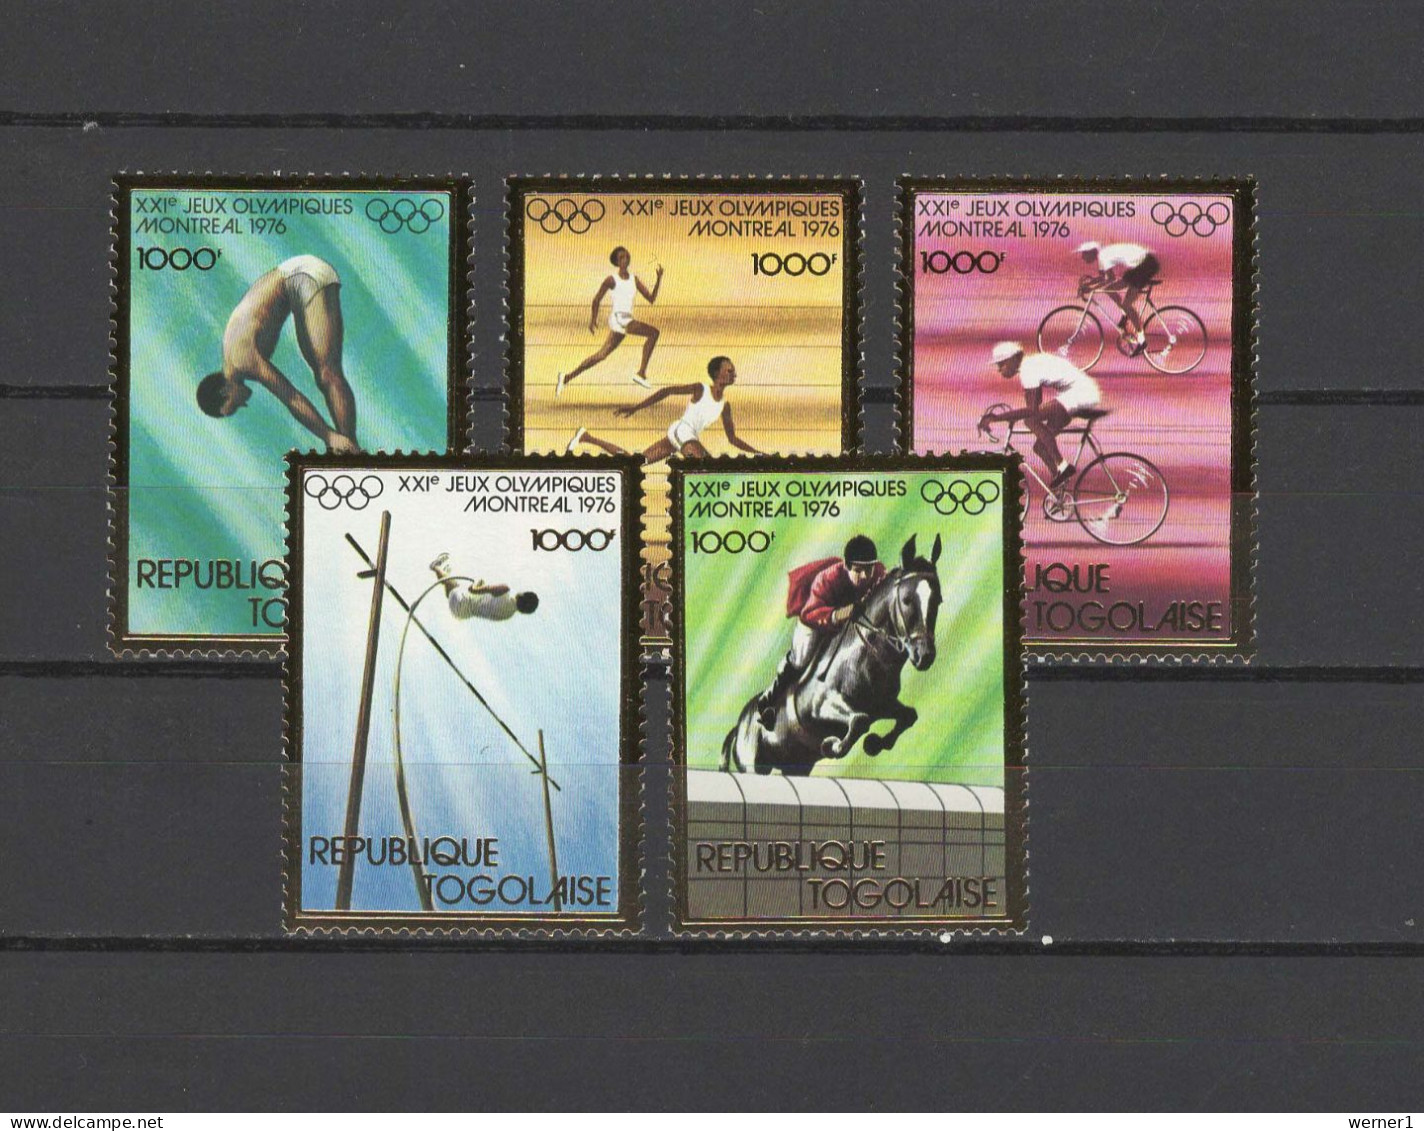 Togo 1976 Olympic Games Montreal, Athletics, Cycling, Equestrian Set Of 5 MNH -scarce- - Ete 1976: Montréal